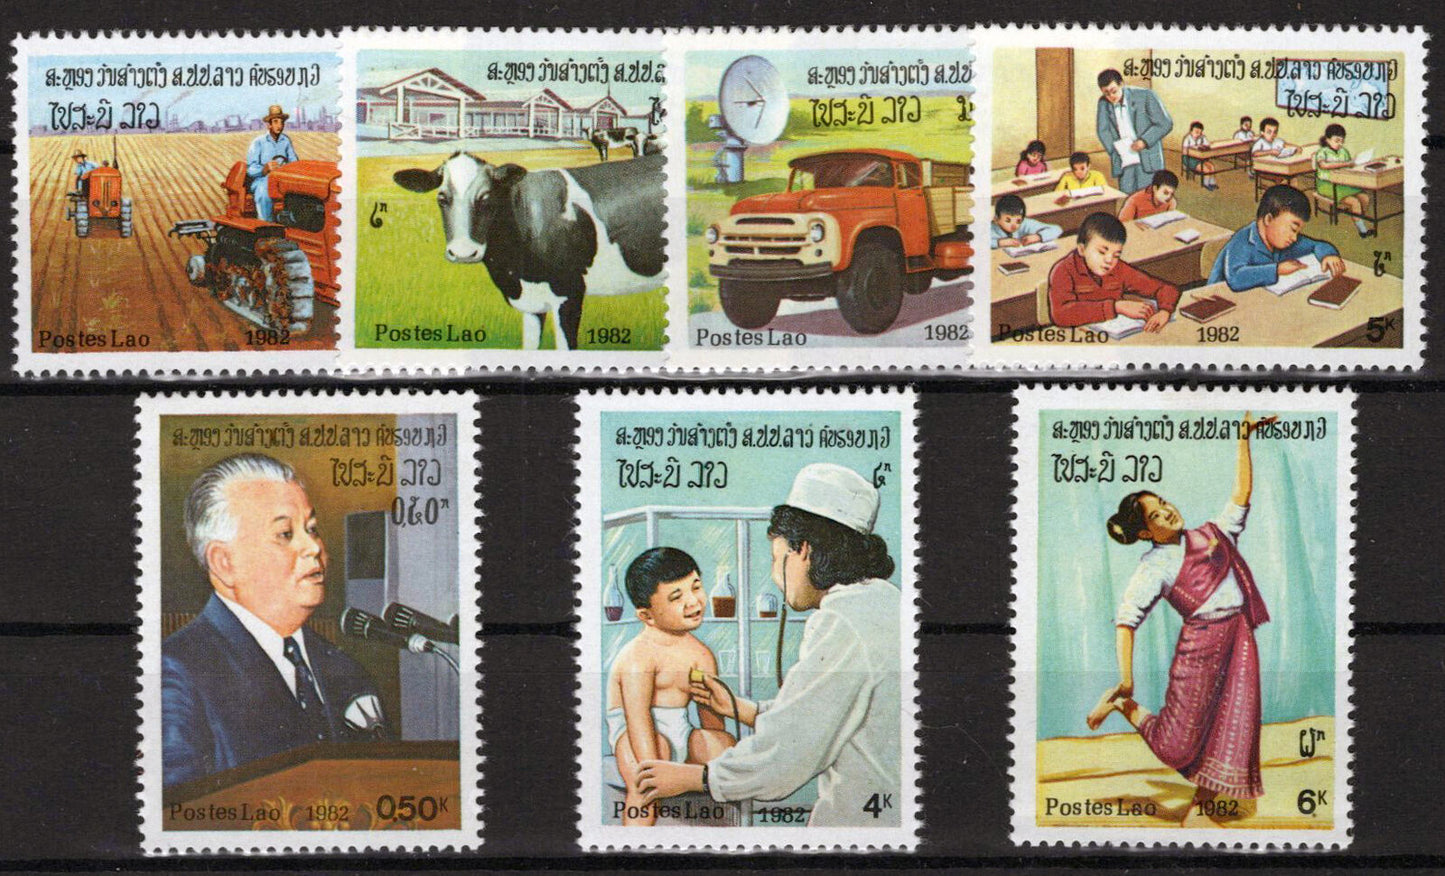 ZAYIX - Laos 419-425 MNH 7th Anniversary of the Republic Agriculture 052023S25